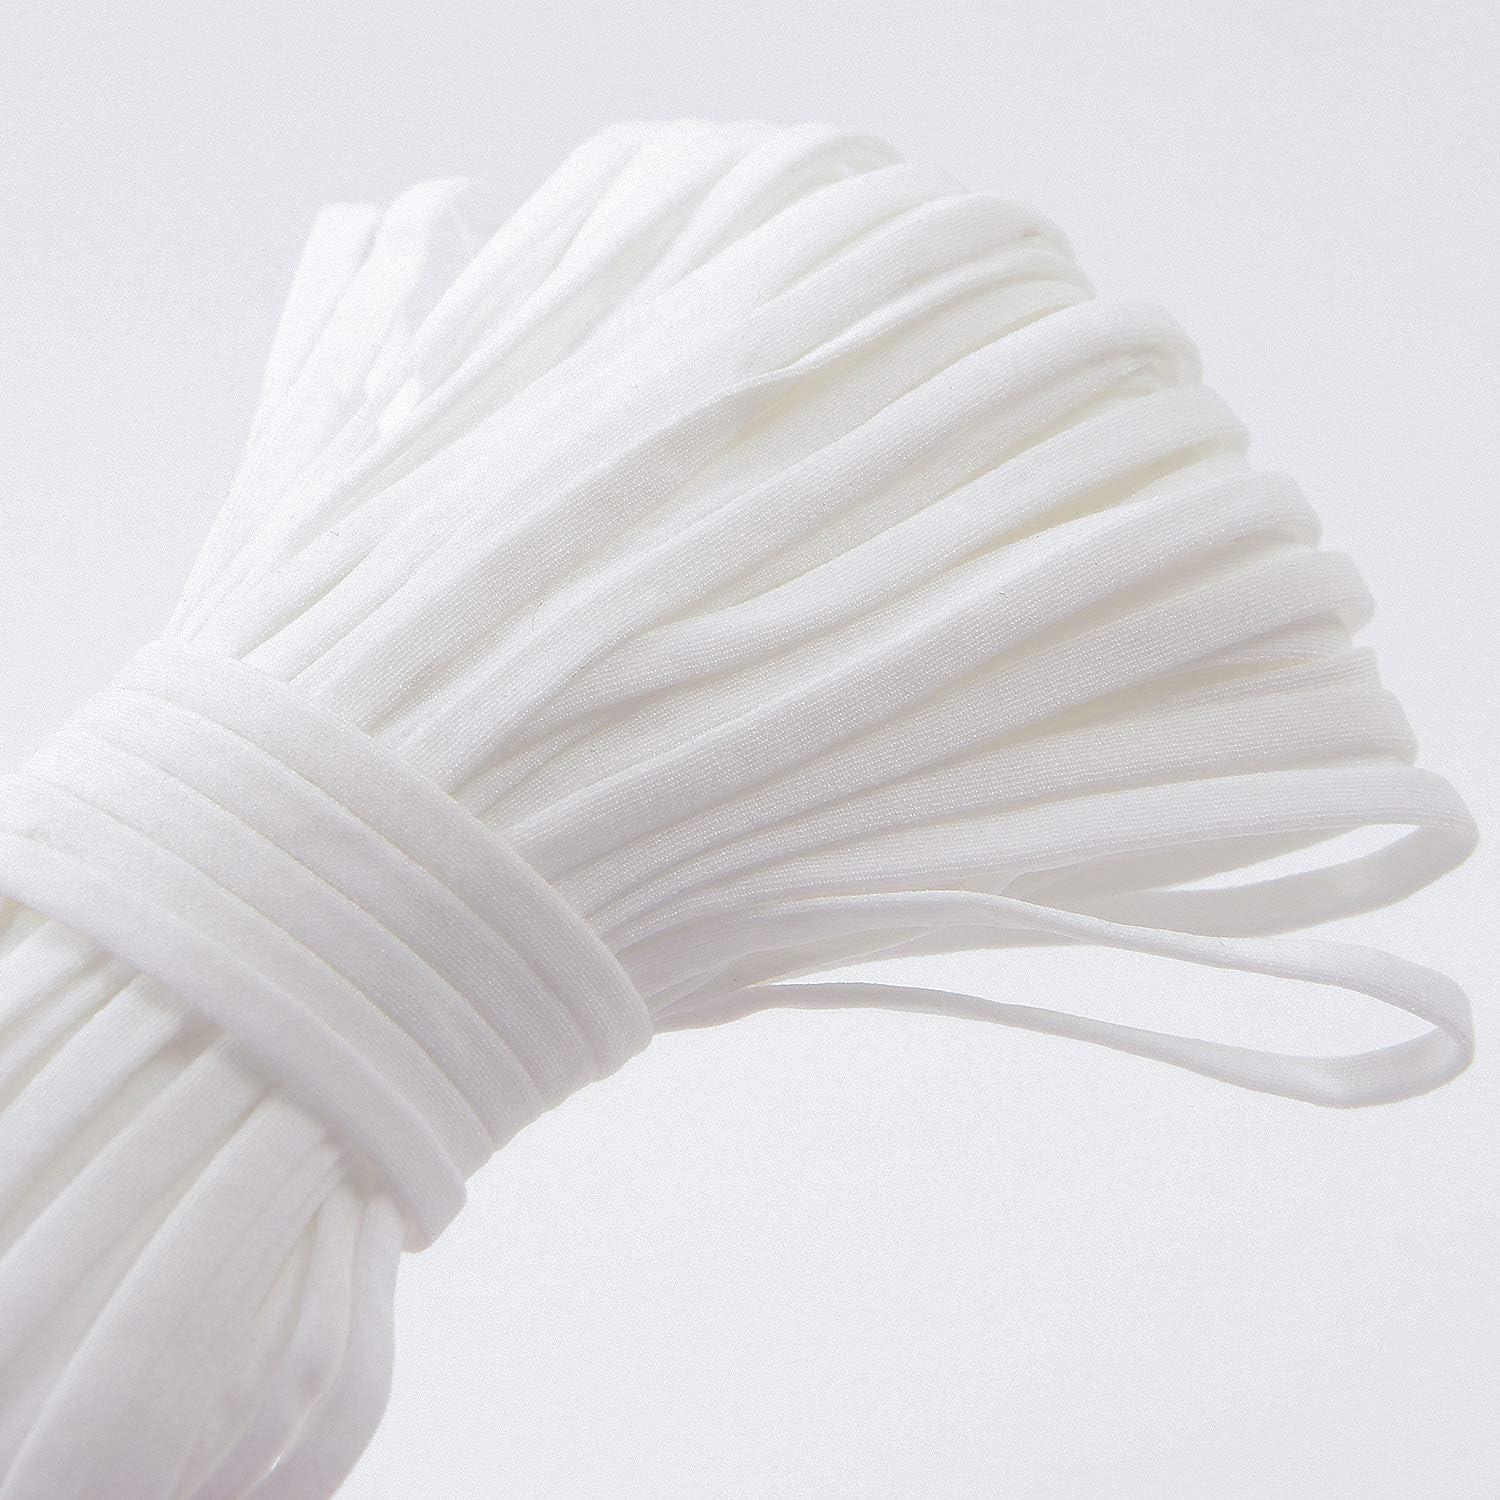 Elastic Band For Sewing 1/4 Inch Braided DIY Crafts Masks Stretch Cord -  Off White Color 10 Yards [1 Pack]